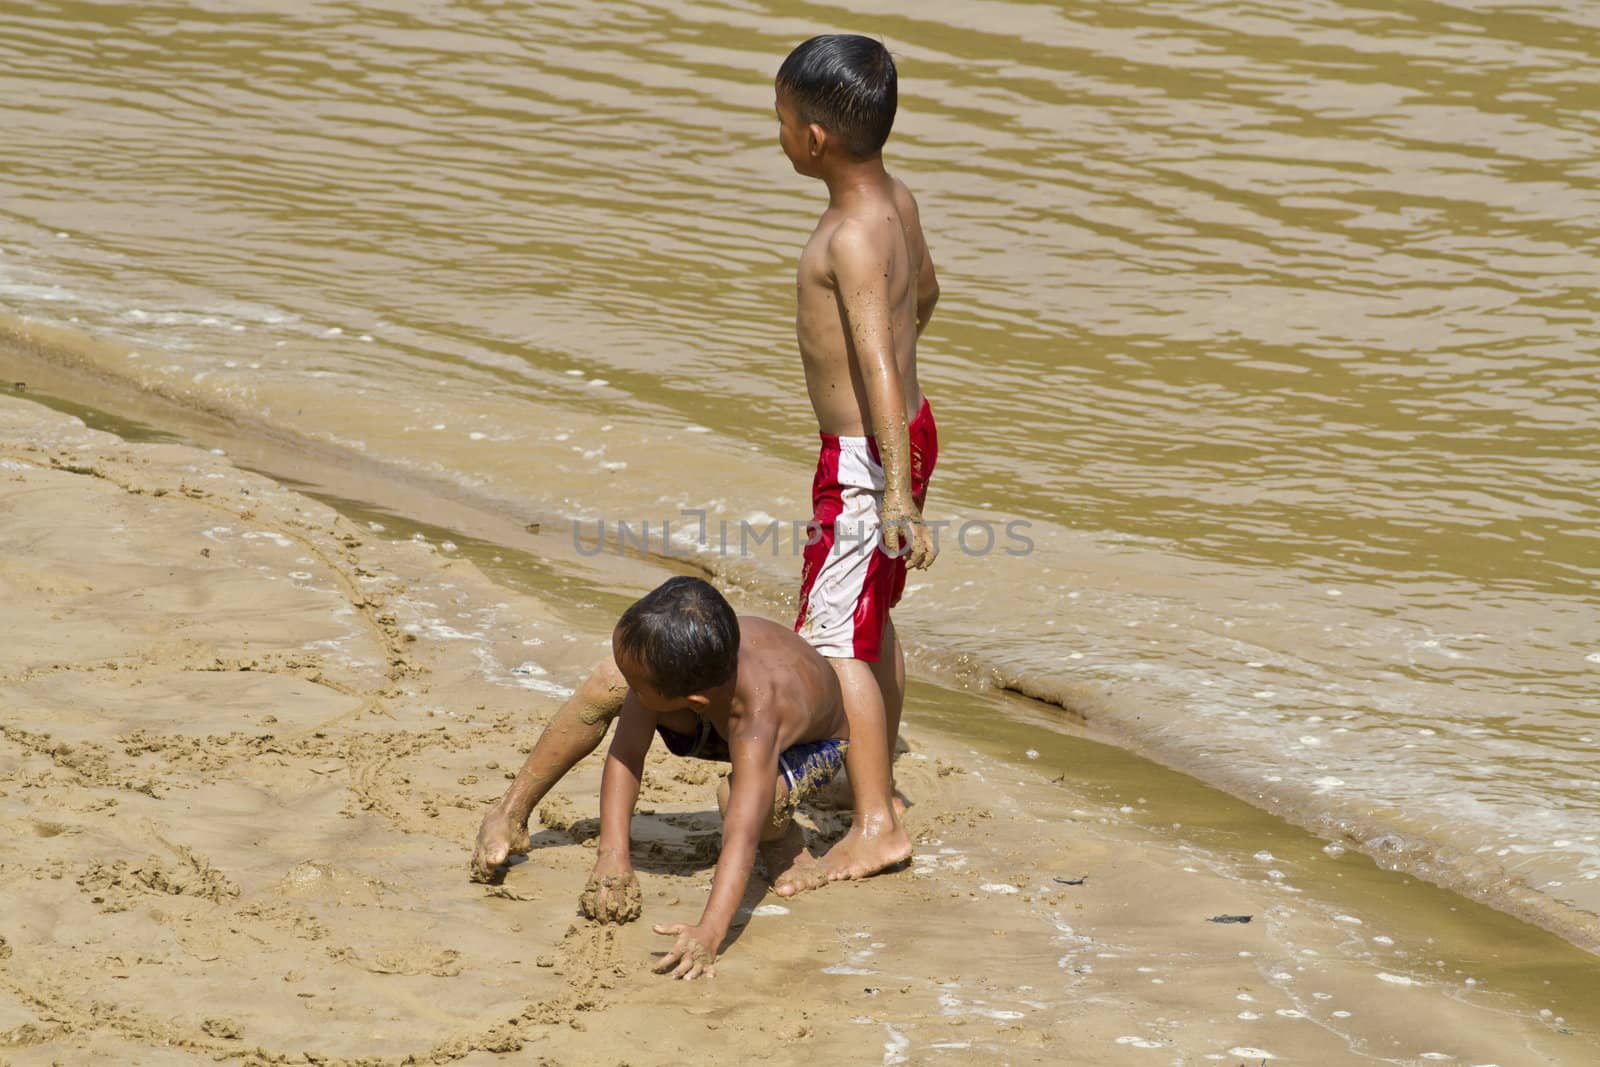 Kids Playing by The River II by azamshah72